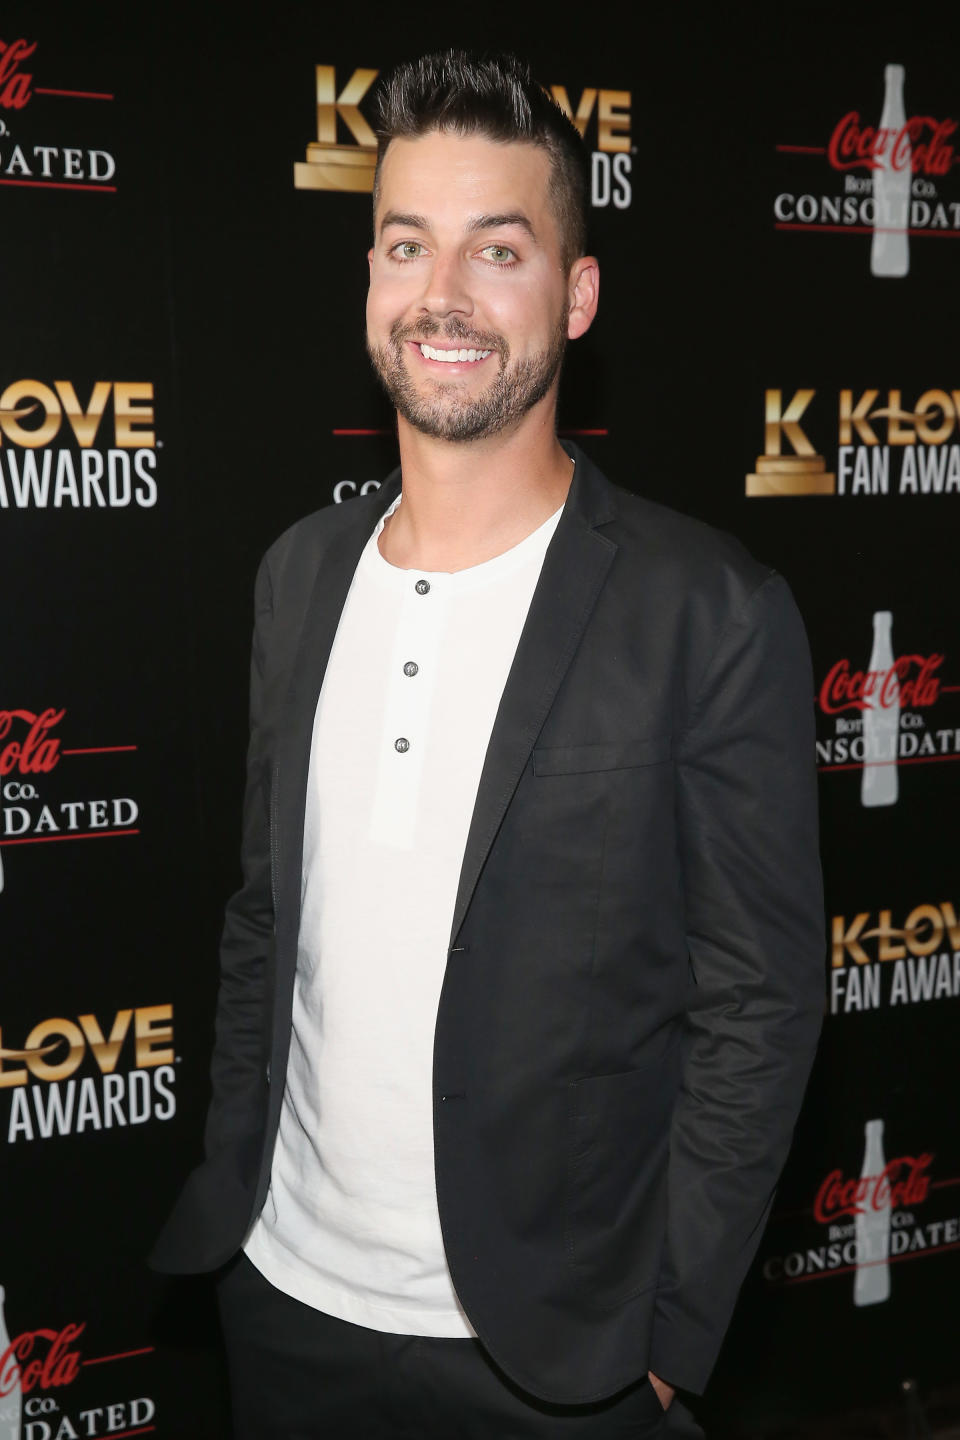 NASHVILLE, TN - MAY 27:  Comedian John Crist attends the 6th Annual KLOVE Fan Awards at The Grand Ole Opry on May 27, 2018 in Nashville, Tennessee.  (Photo by Terry Wyatt/Getty Images for KLOVE)